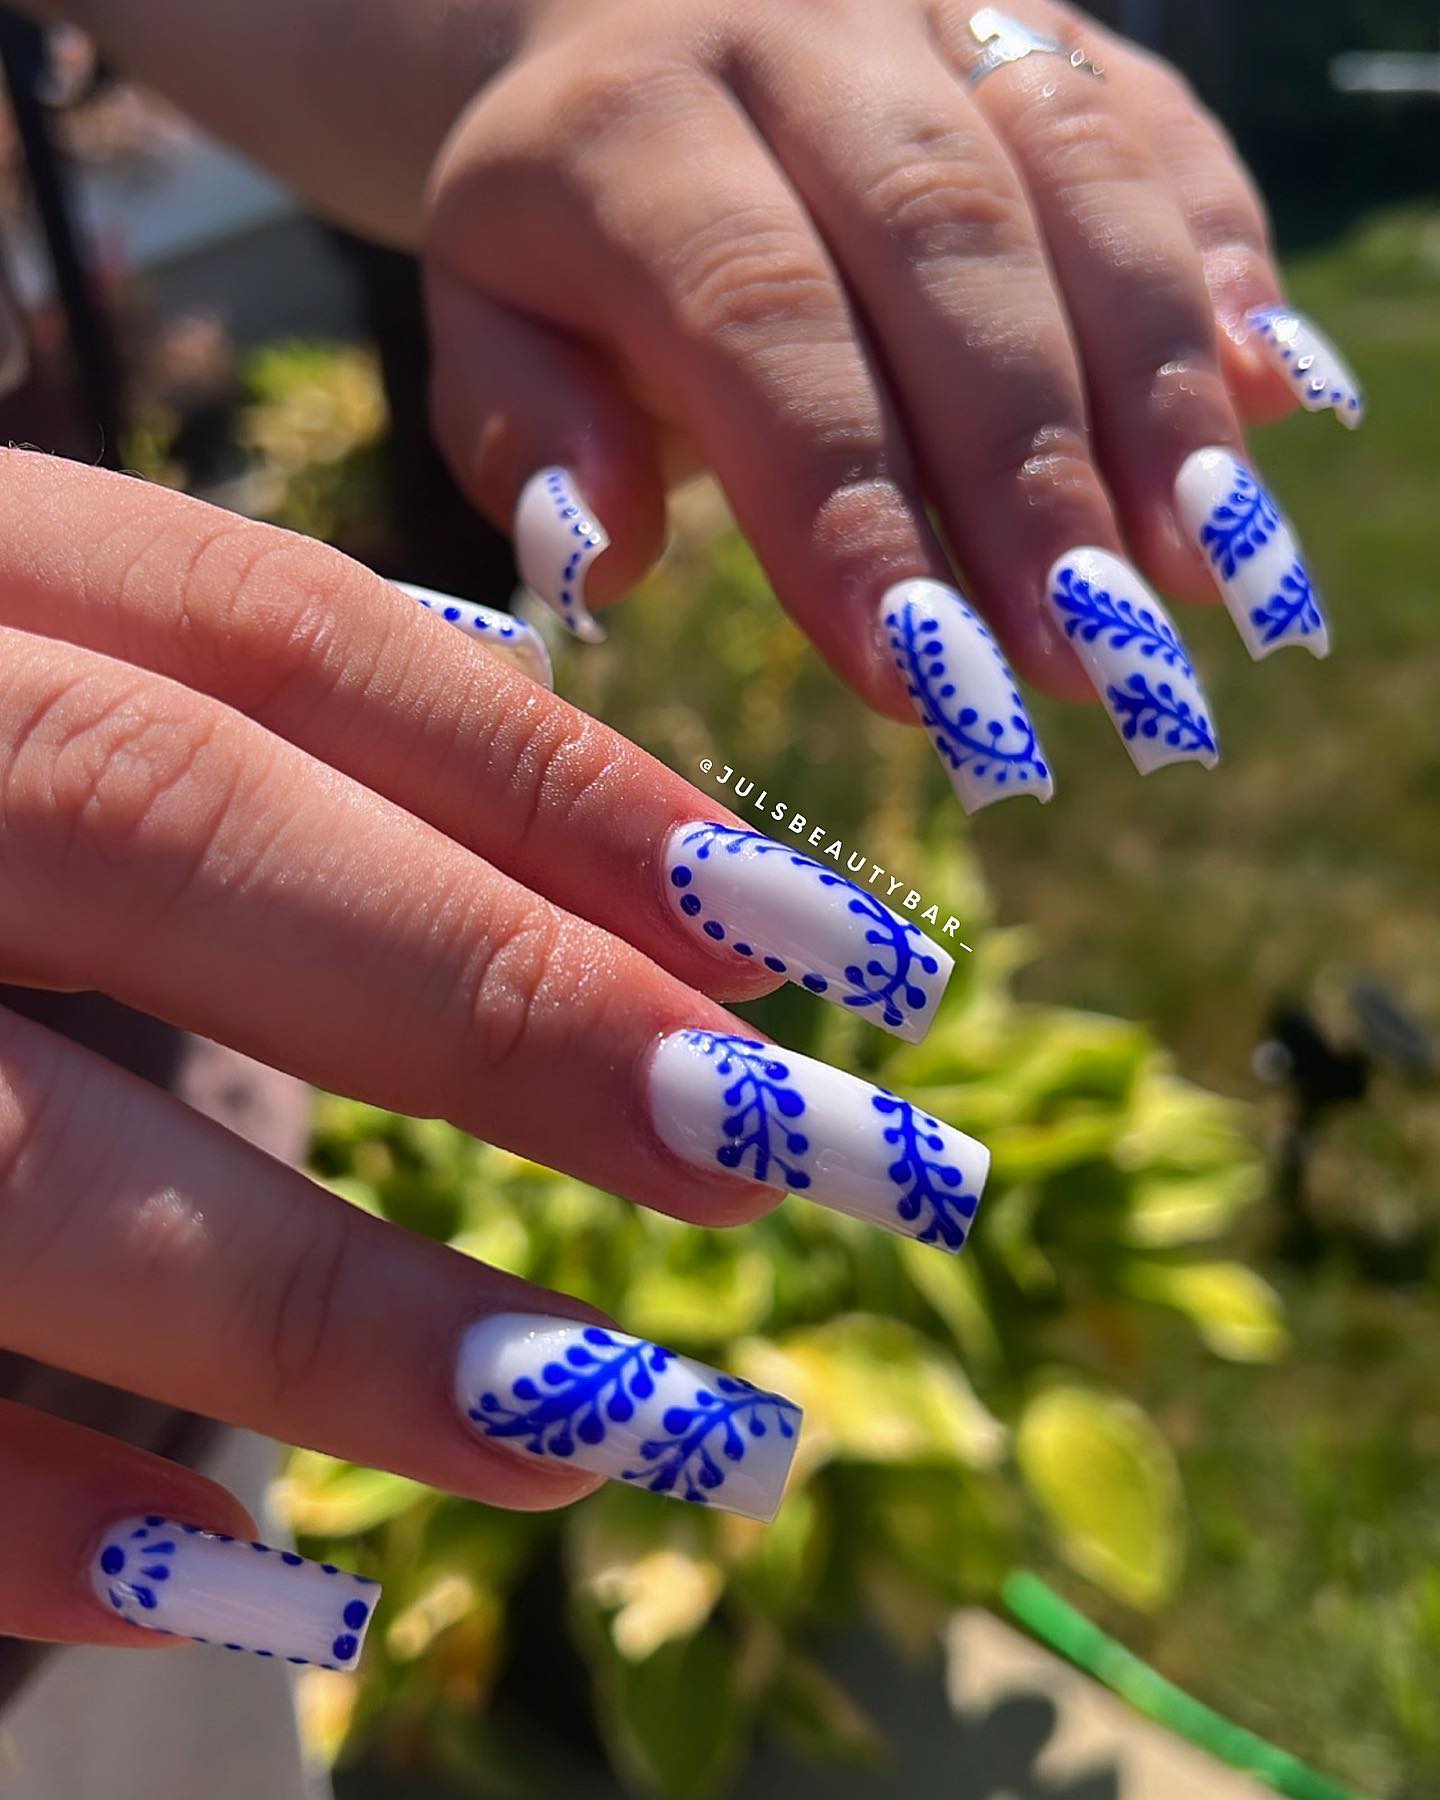 navy blue and white nails